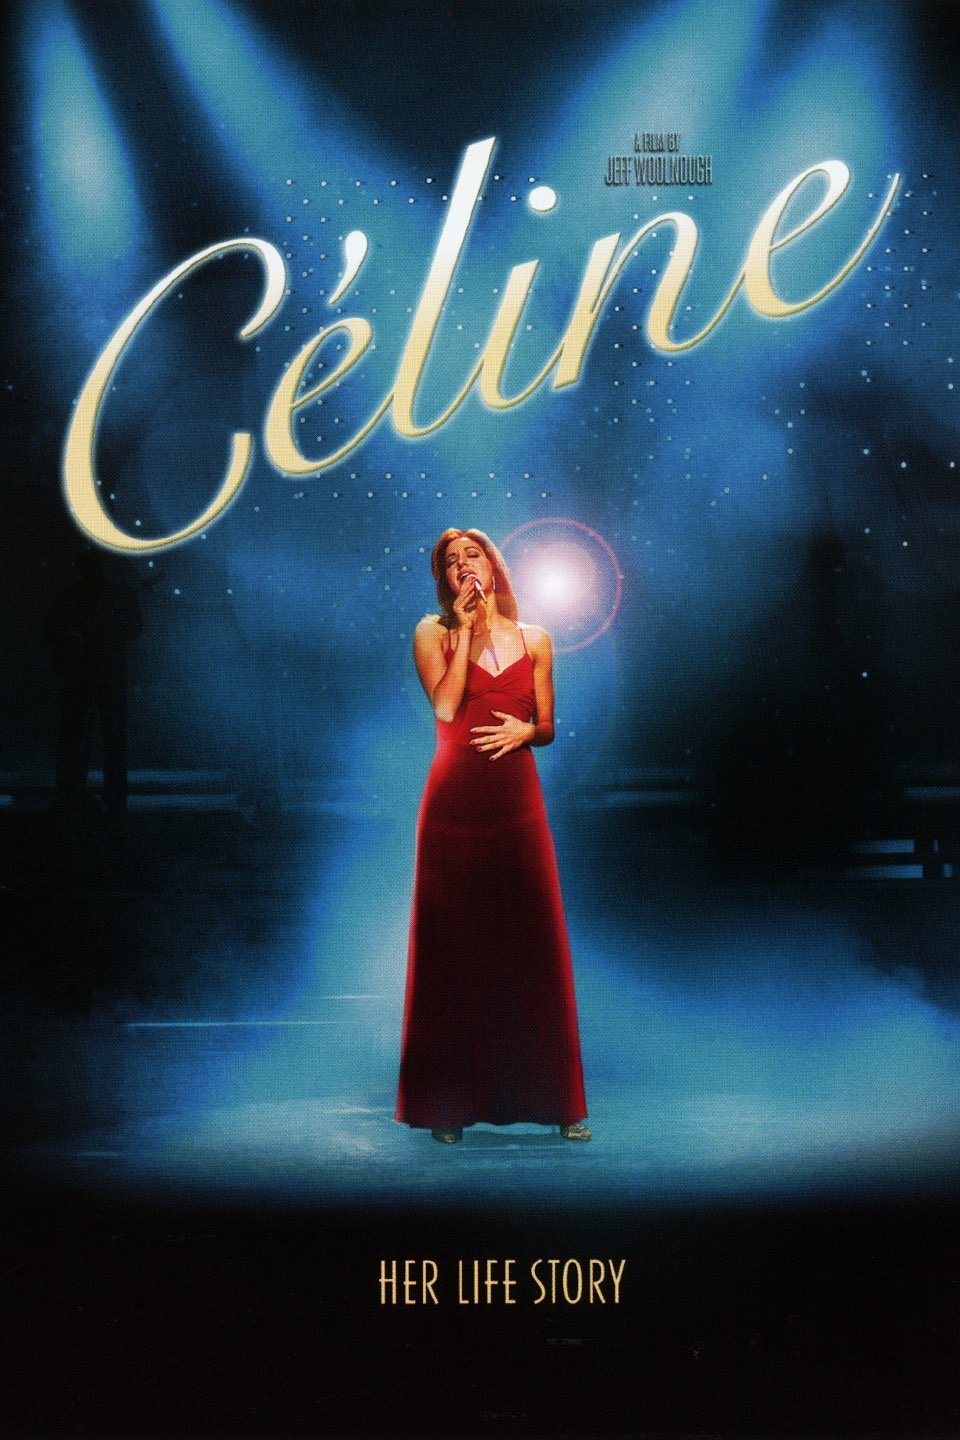 Poster of the movie Céline